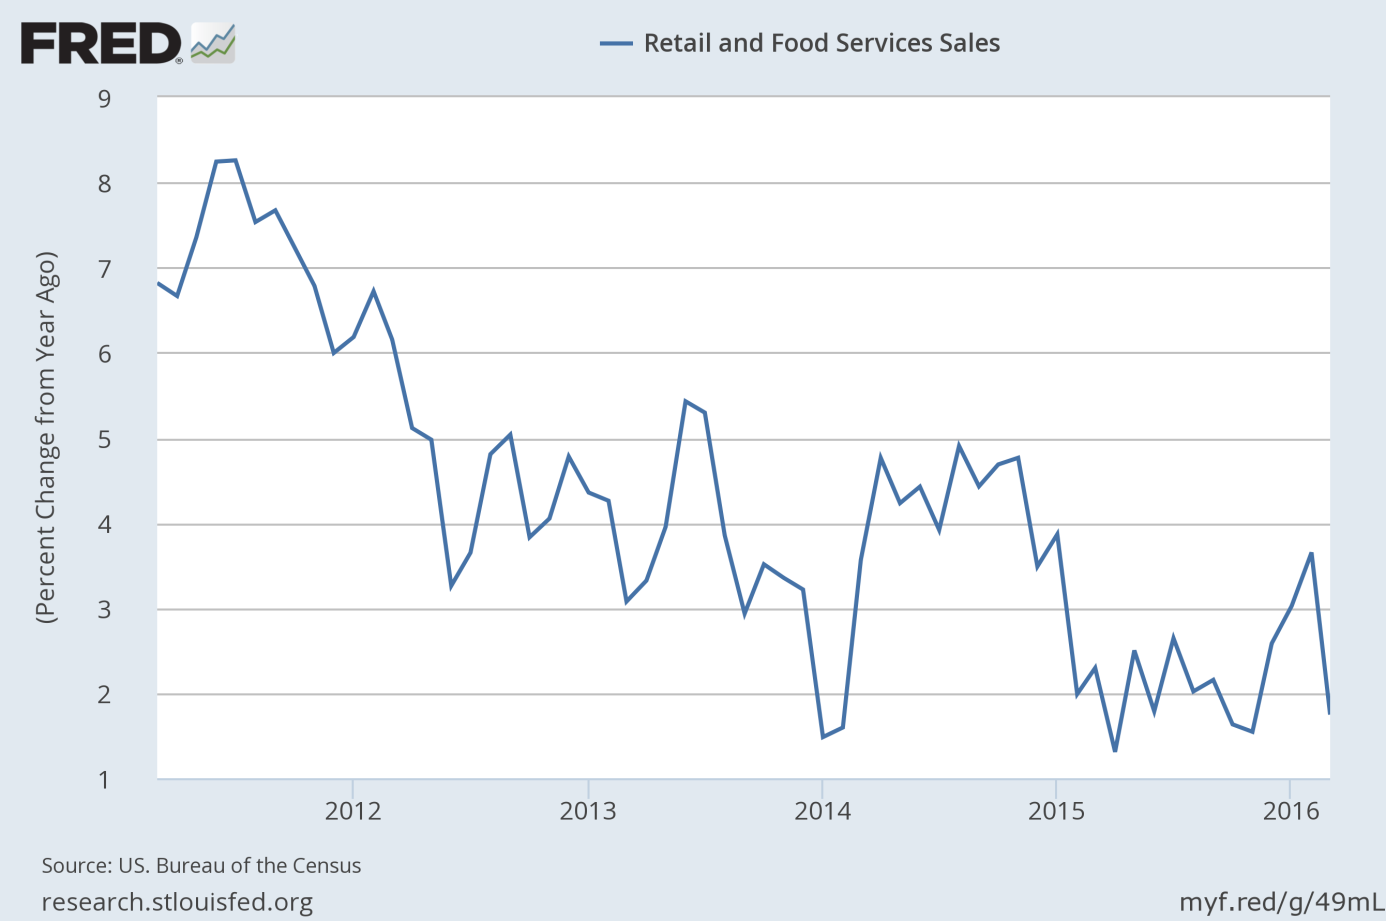 Retail and food services sales